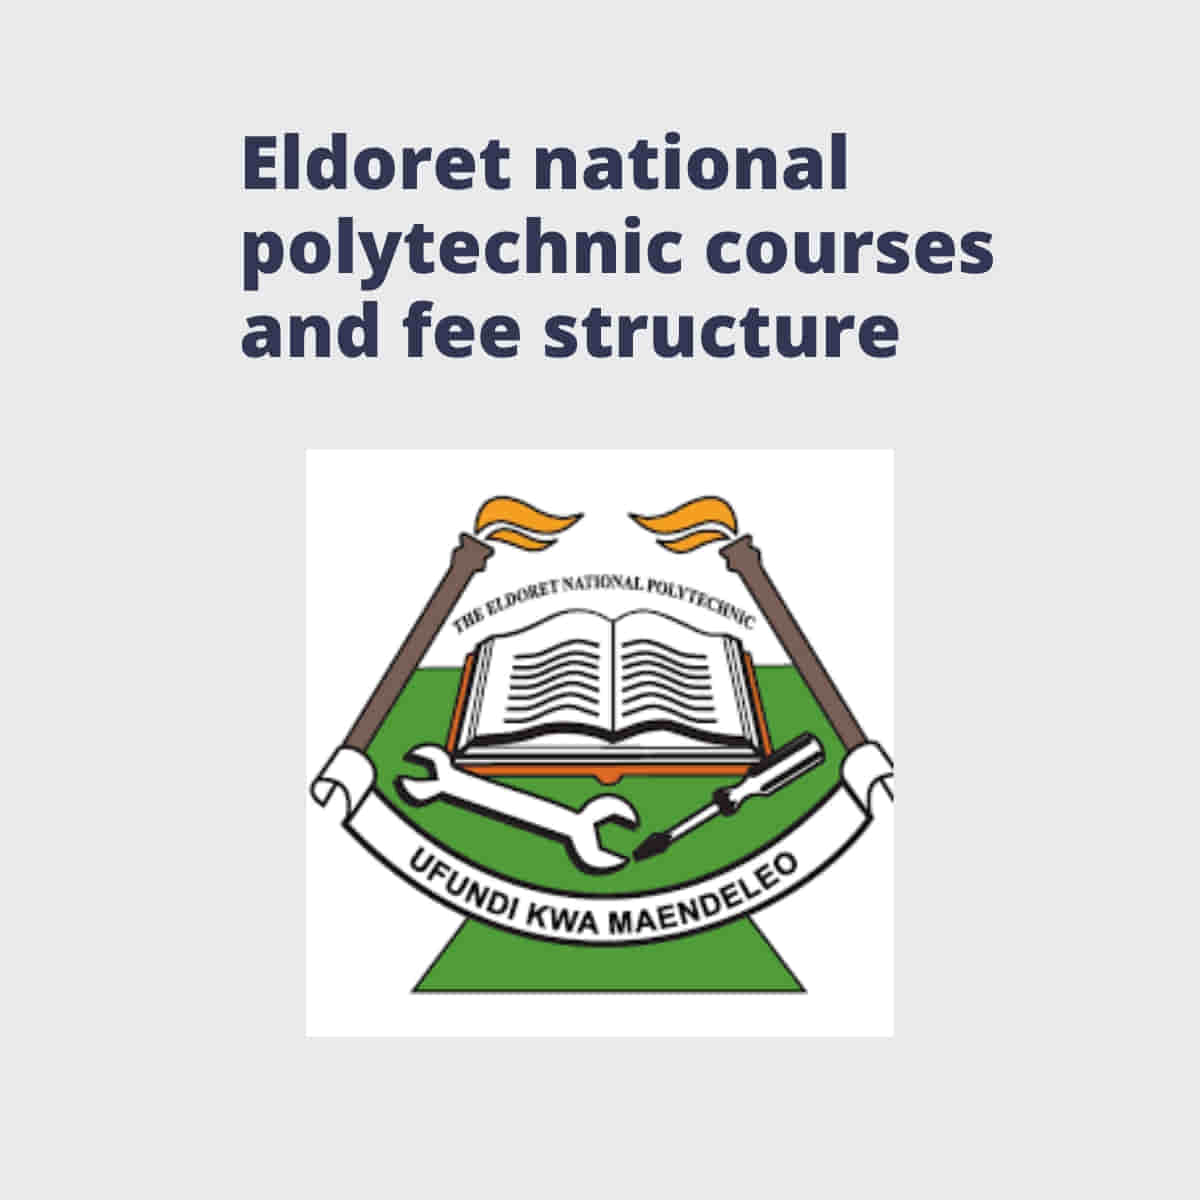 Eldoret national polytechnic courses and fee structure